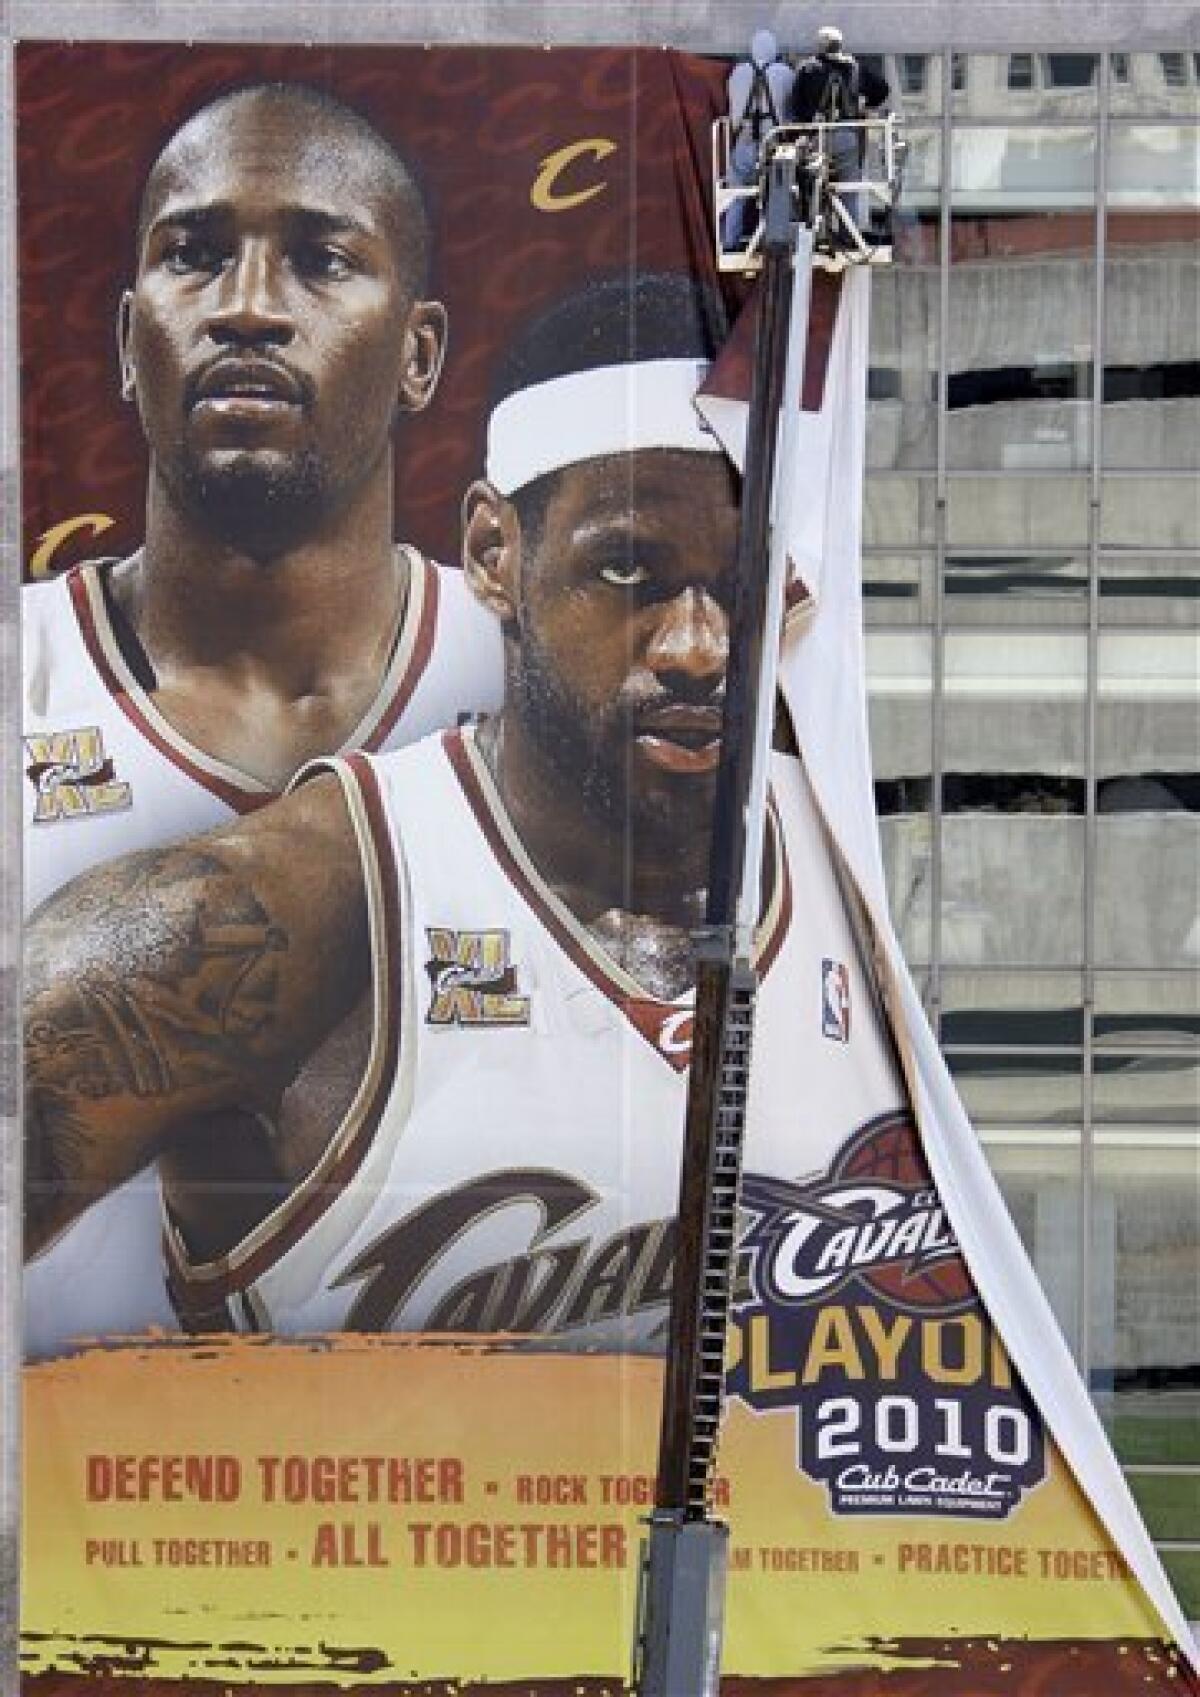 Cleveland Cavaliers to host 2022 NBA All-Star Game at Quicken